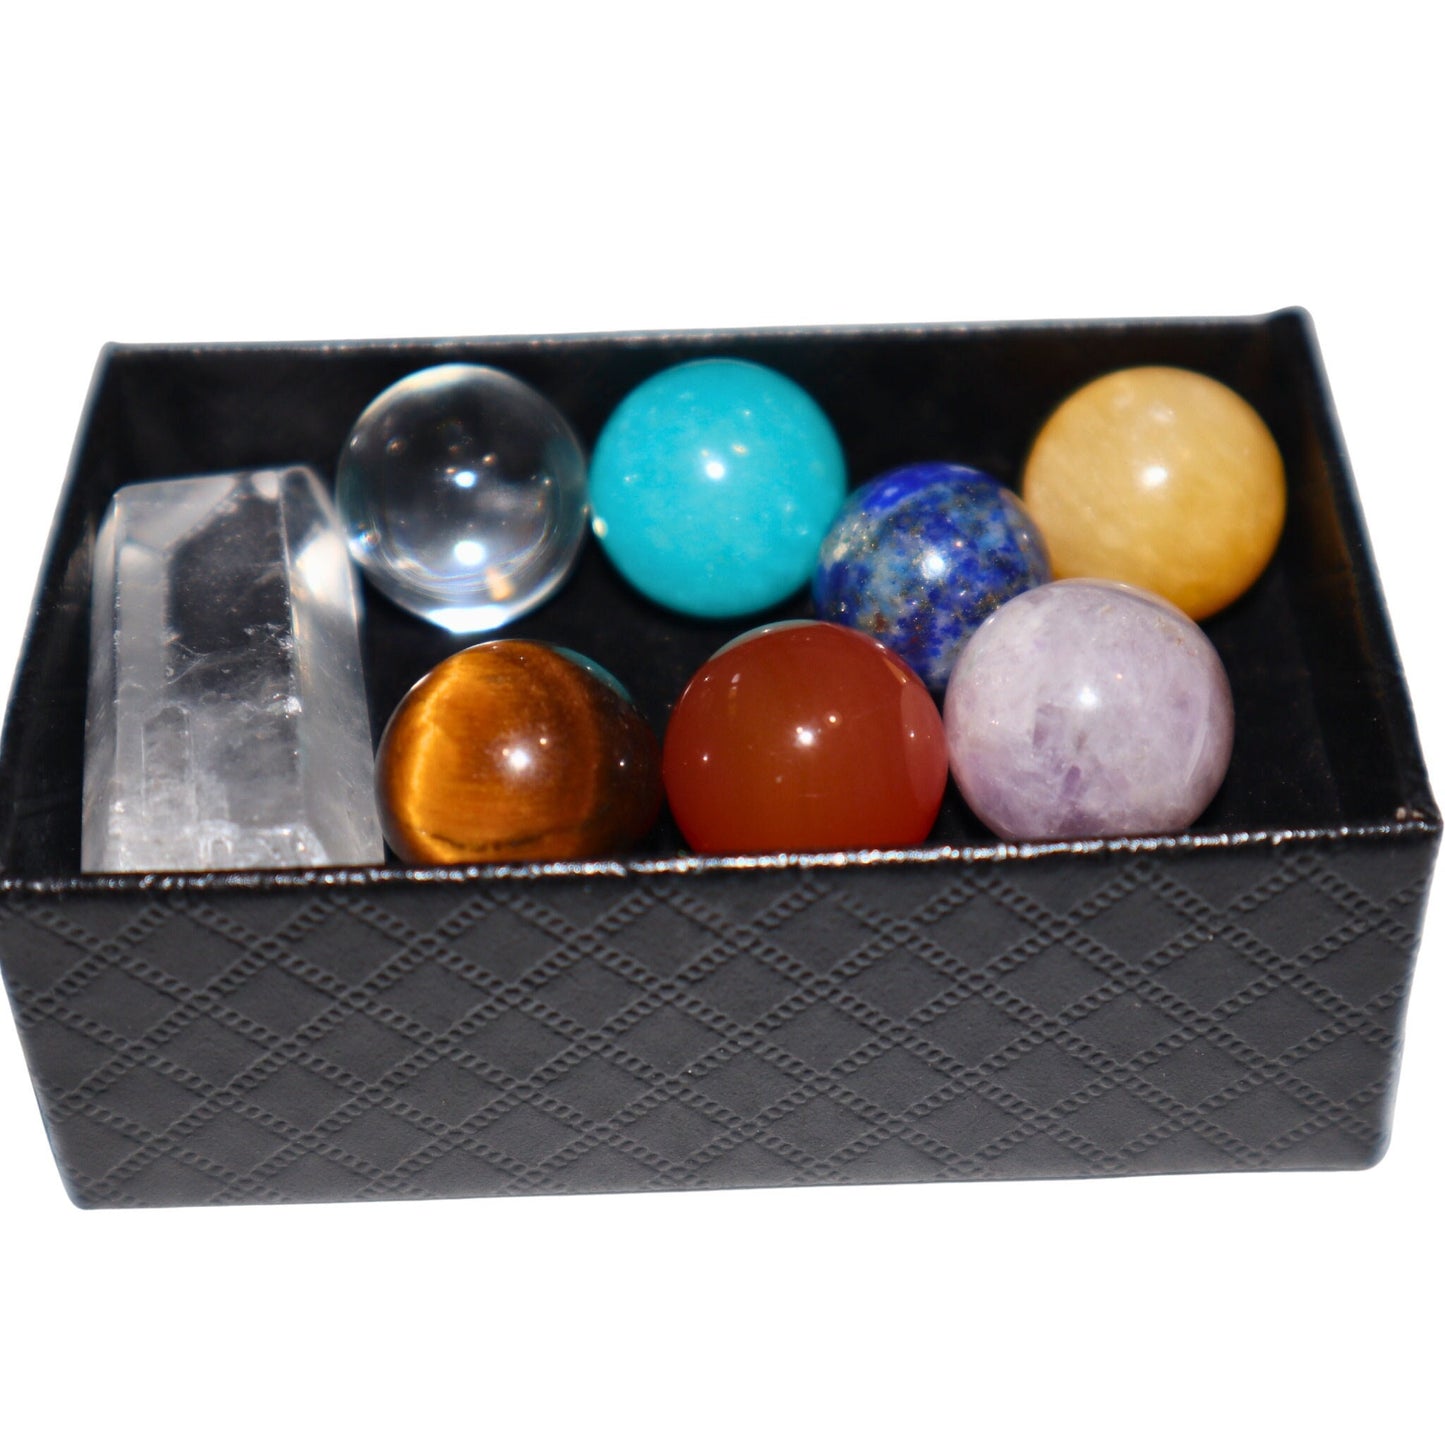 BEGINNER CRYSTAL SET, Chakra Crystal Set, Crystal Collection, 8 Pieces Chakra Set Includes 7 Mini Marble Spheres and 1 Clear Quartz Point